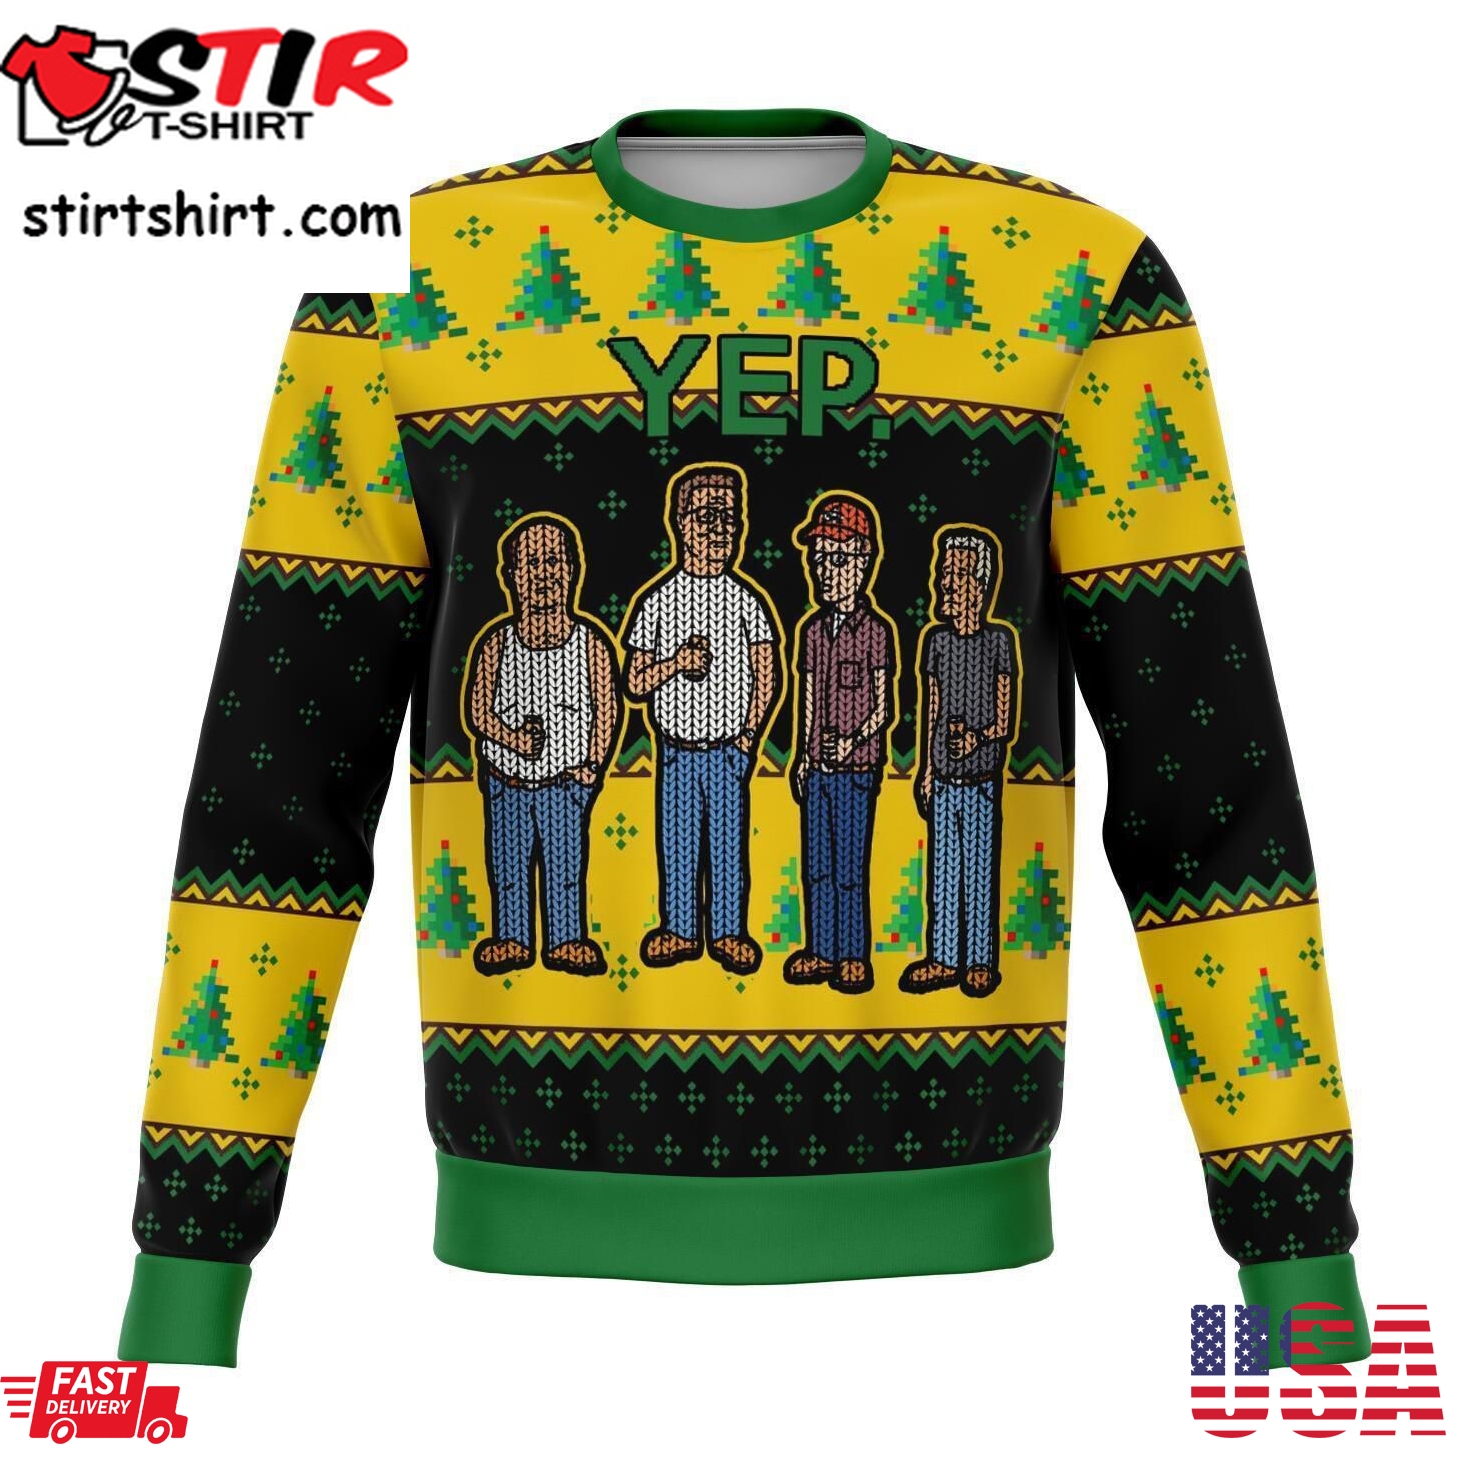 King Of The Hill Yep Ugly Sweater